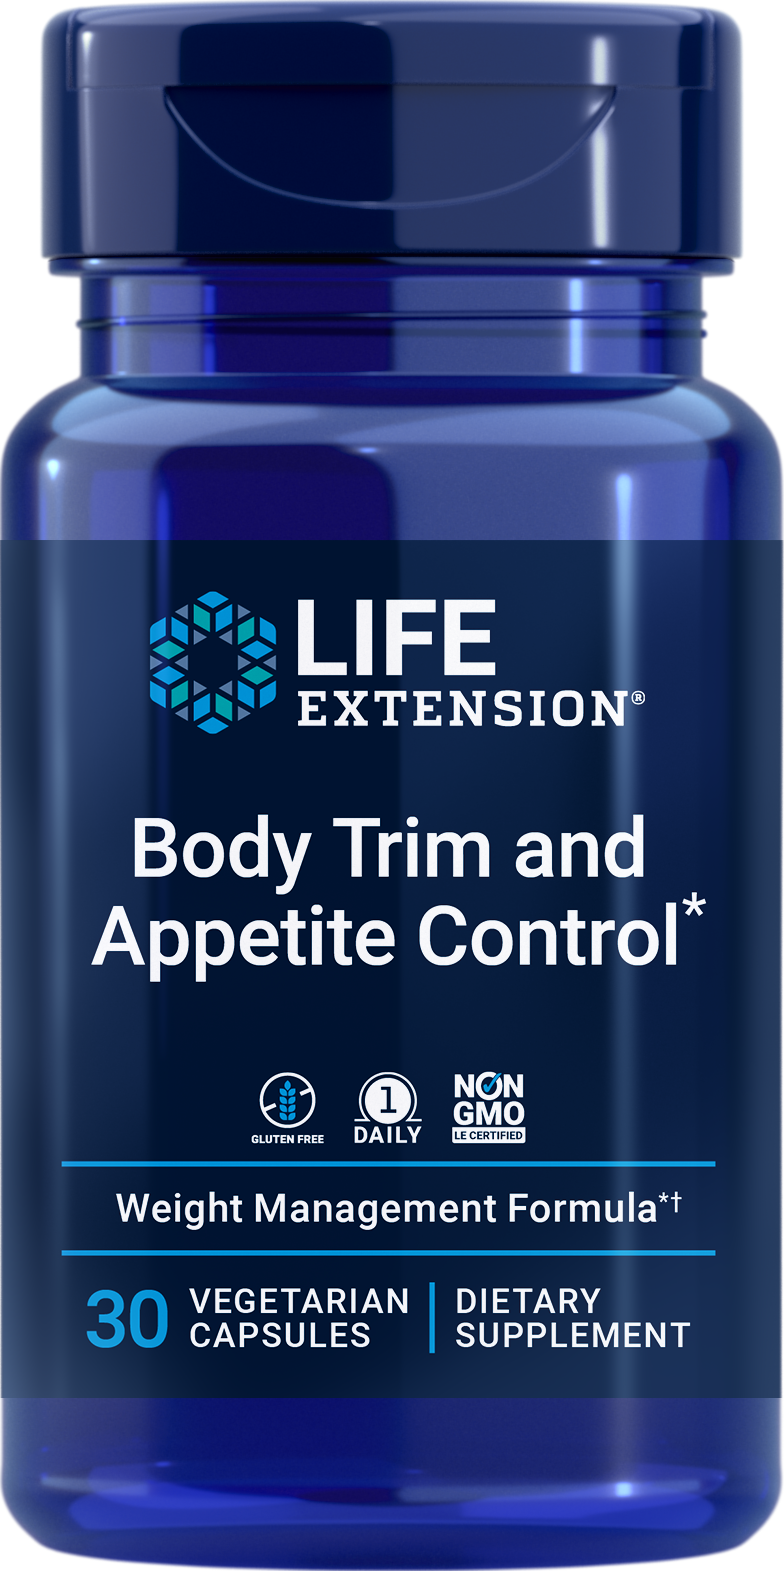 Body Trim & Appetite Control, 30 vegetarian capsules with Metabolaid® to help master your appetite & avoid overeating.